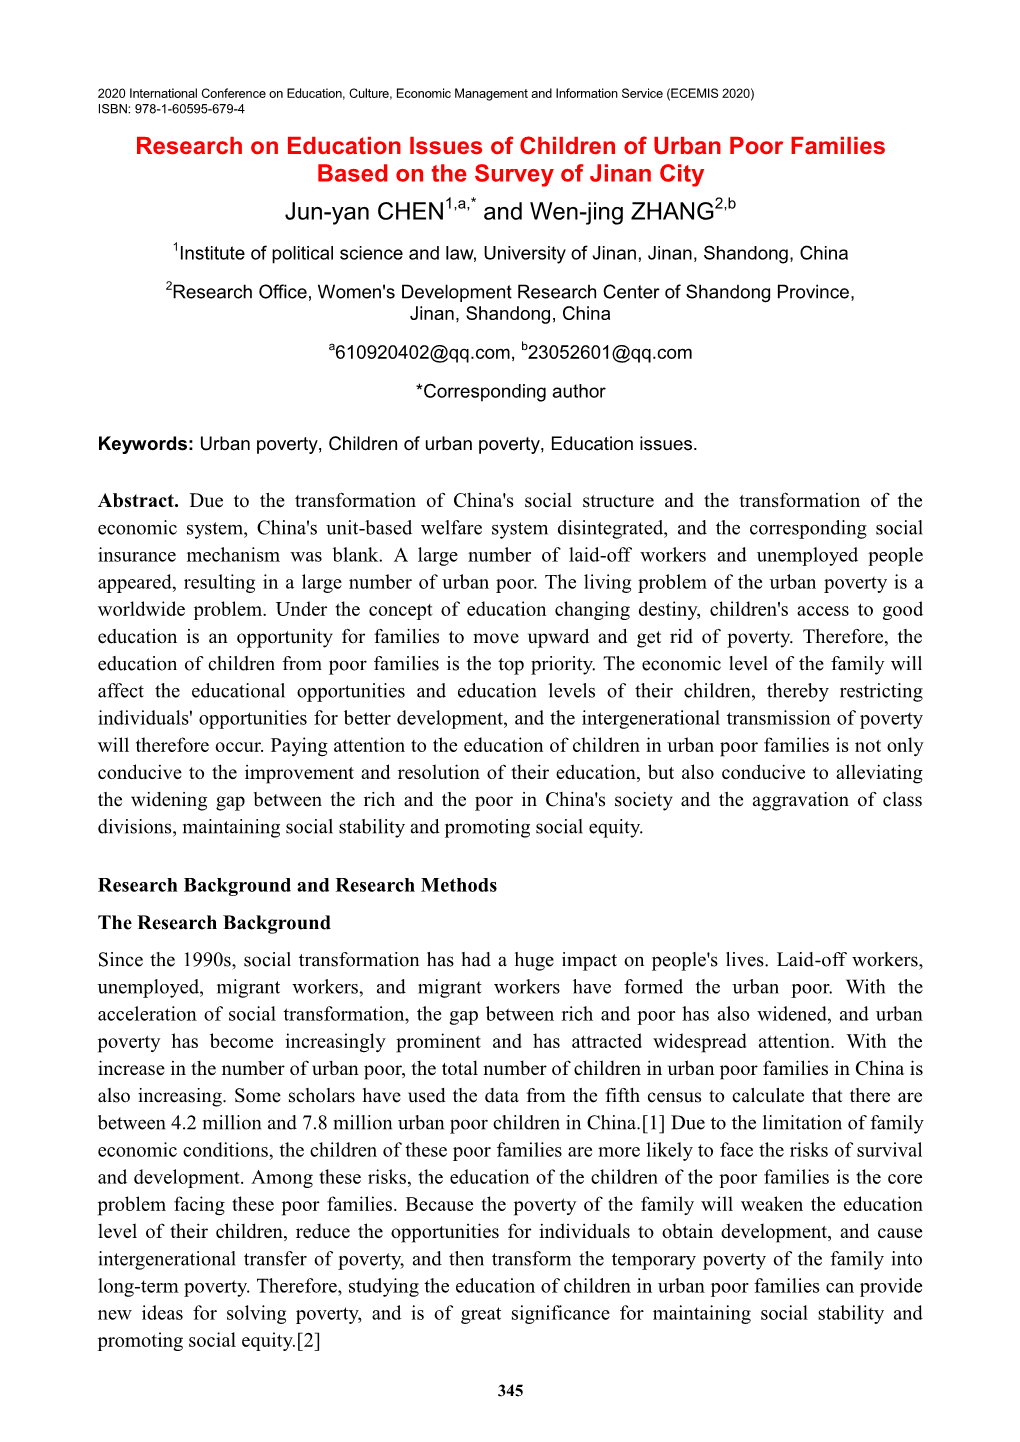 Research on Education Issues of Children of Urban Poor Families Based on the Survey of Jinan City Jun-Yan CHEN1,A,* and Wen-Jing ZHANG2,B